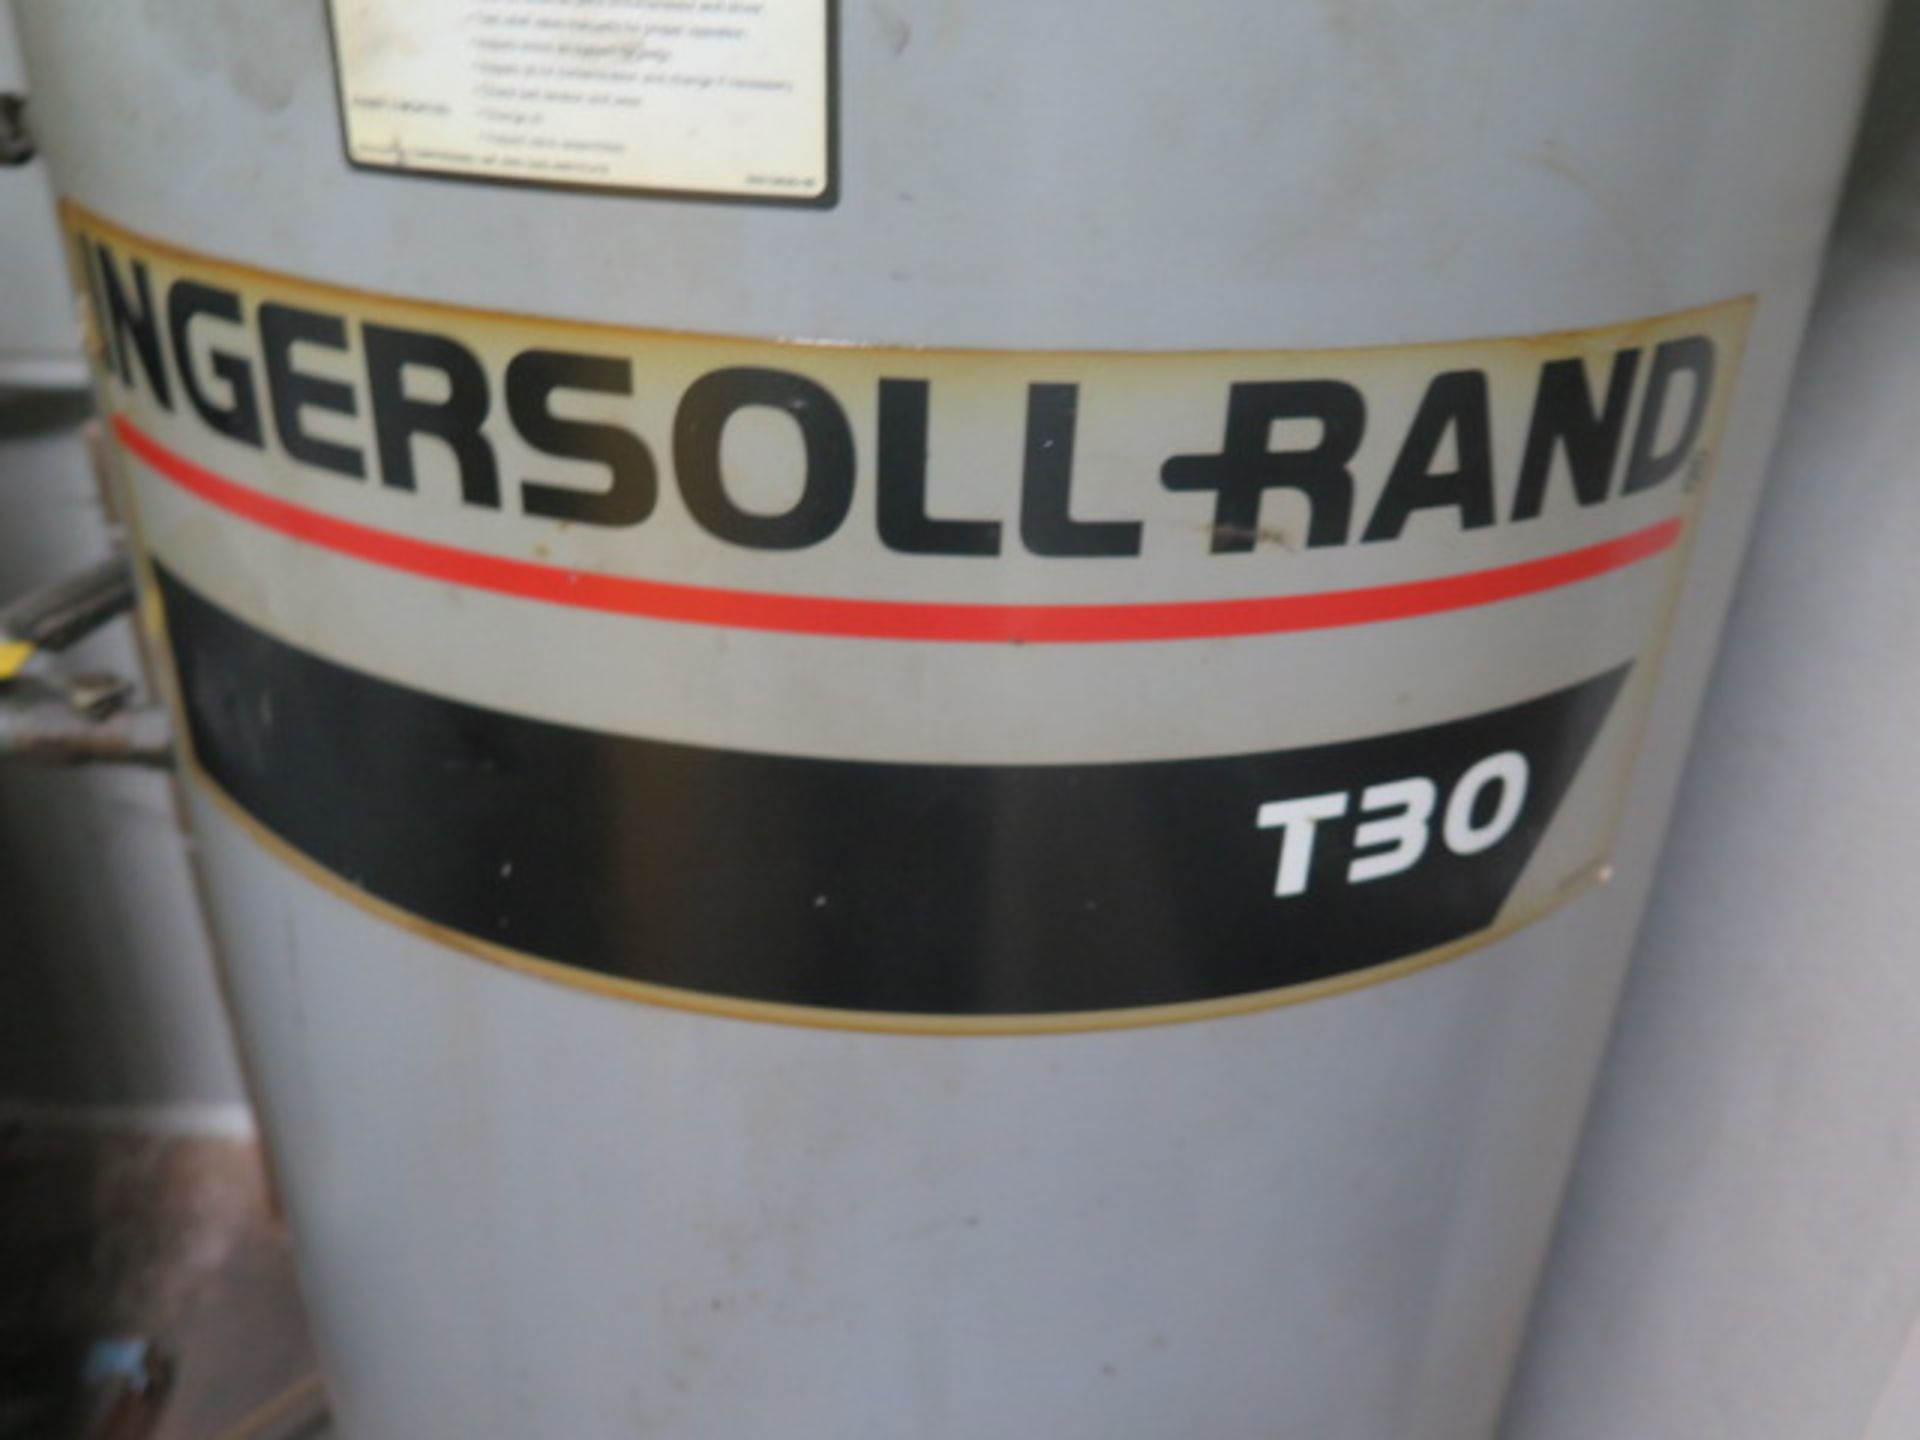 Ingersoll Rand T30 7.5Hp Vertical Air Compressor w/ 2-Stage Pump, 80 Gallon Tank - Image 4 of 5